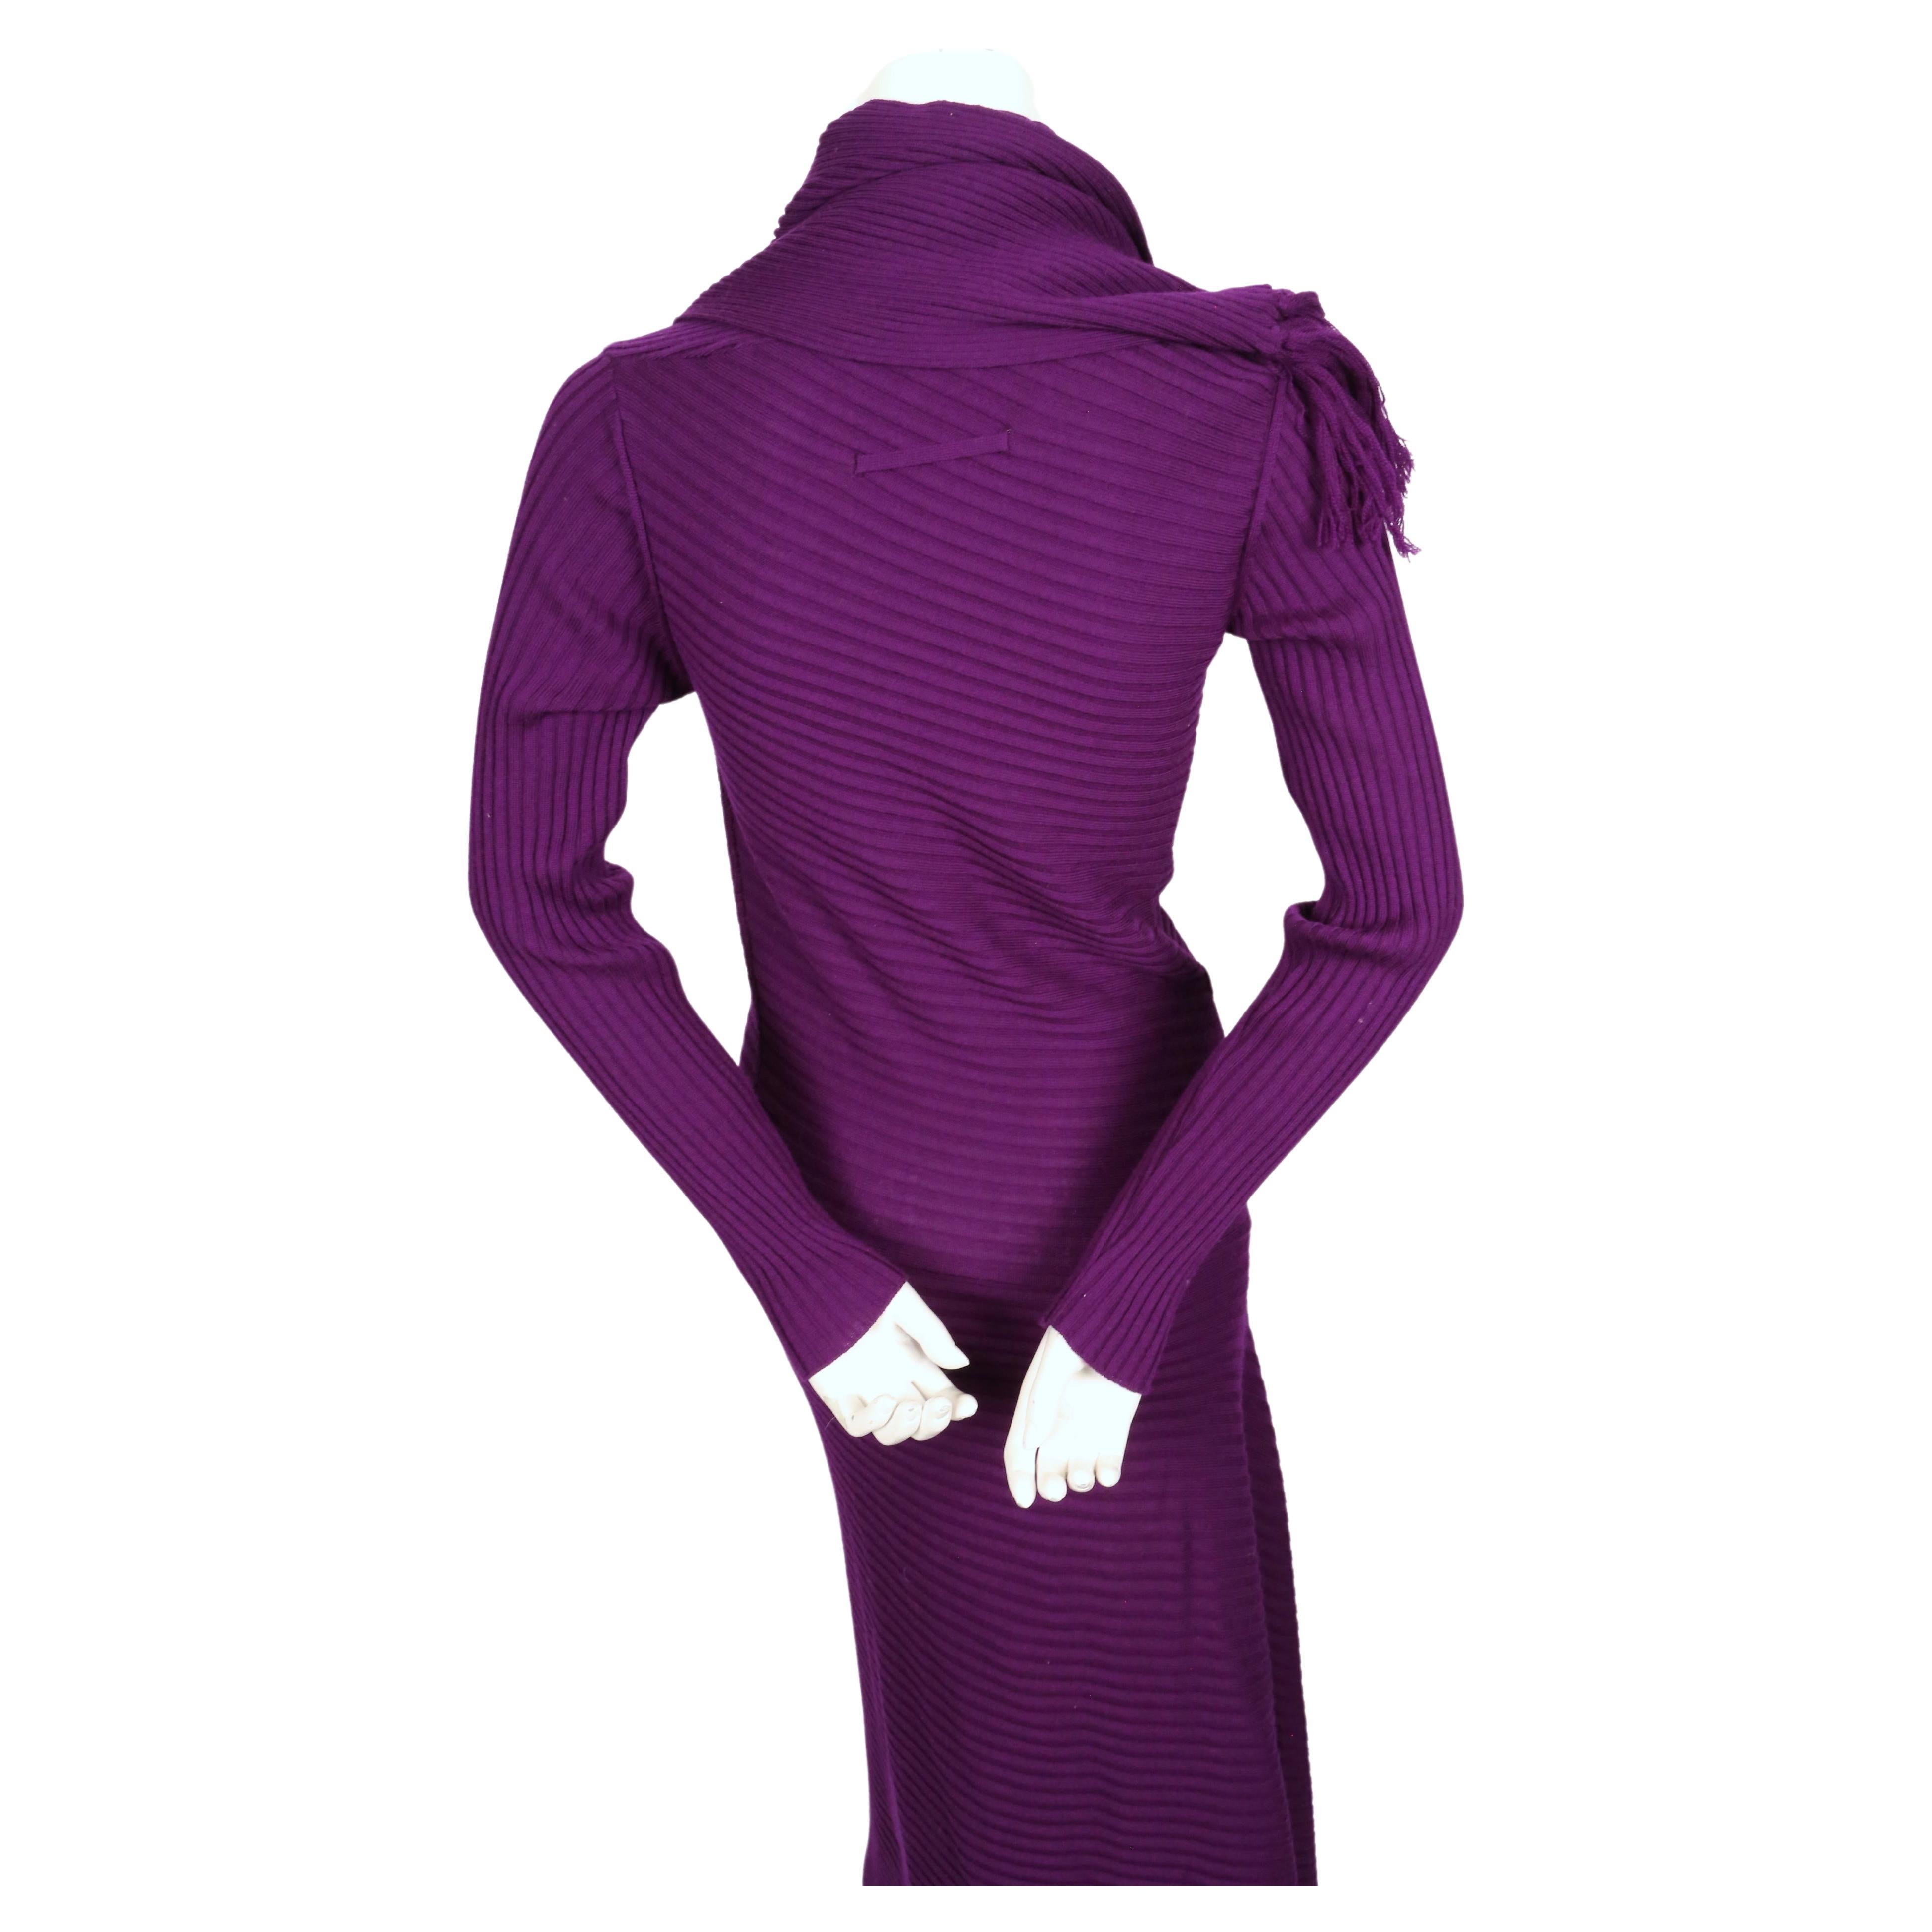  JEAN PAUL GAULTIER purple ribbed knit dress with scarf For Sale 3